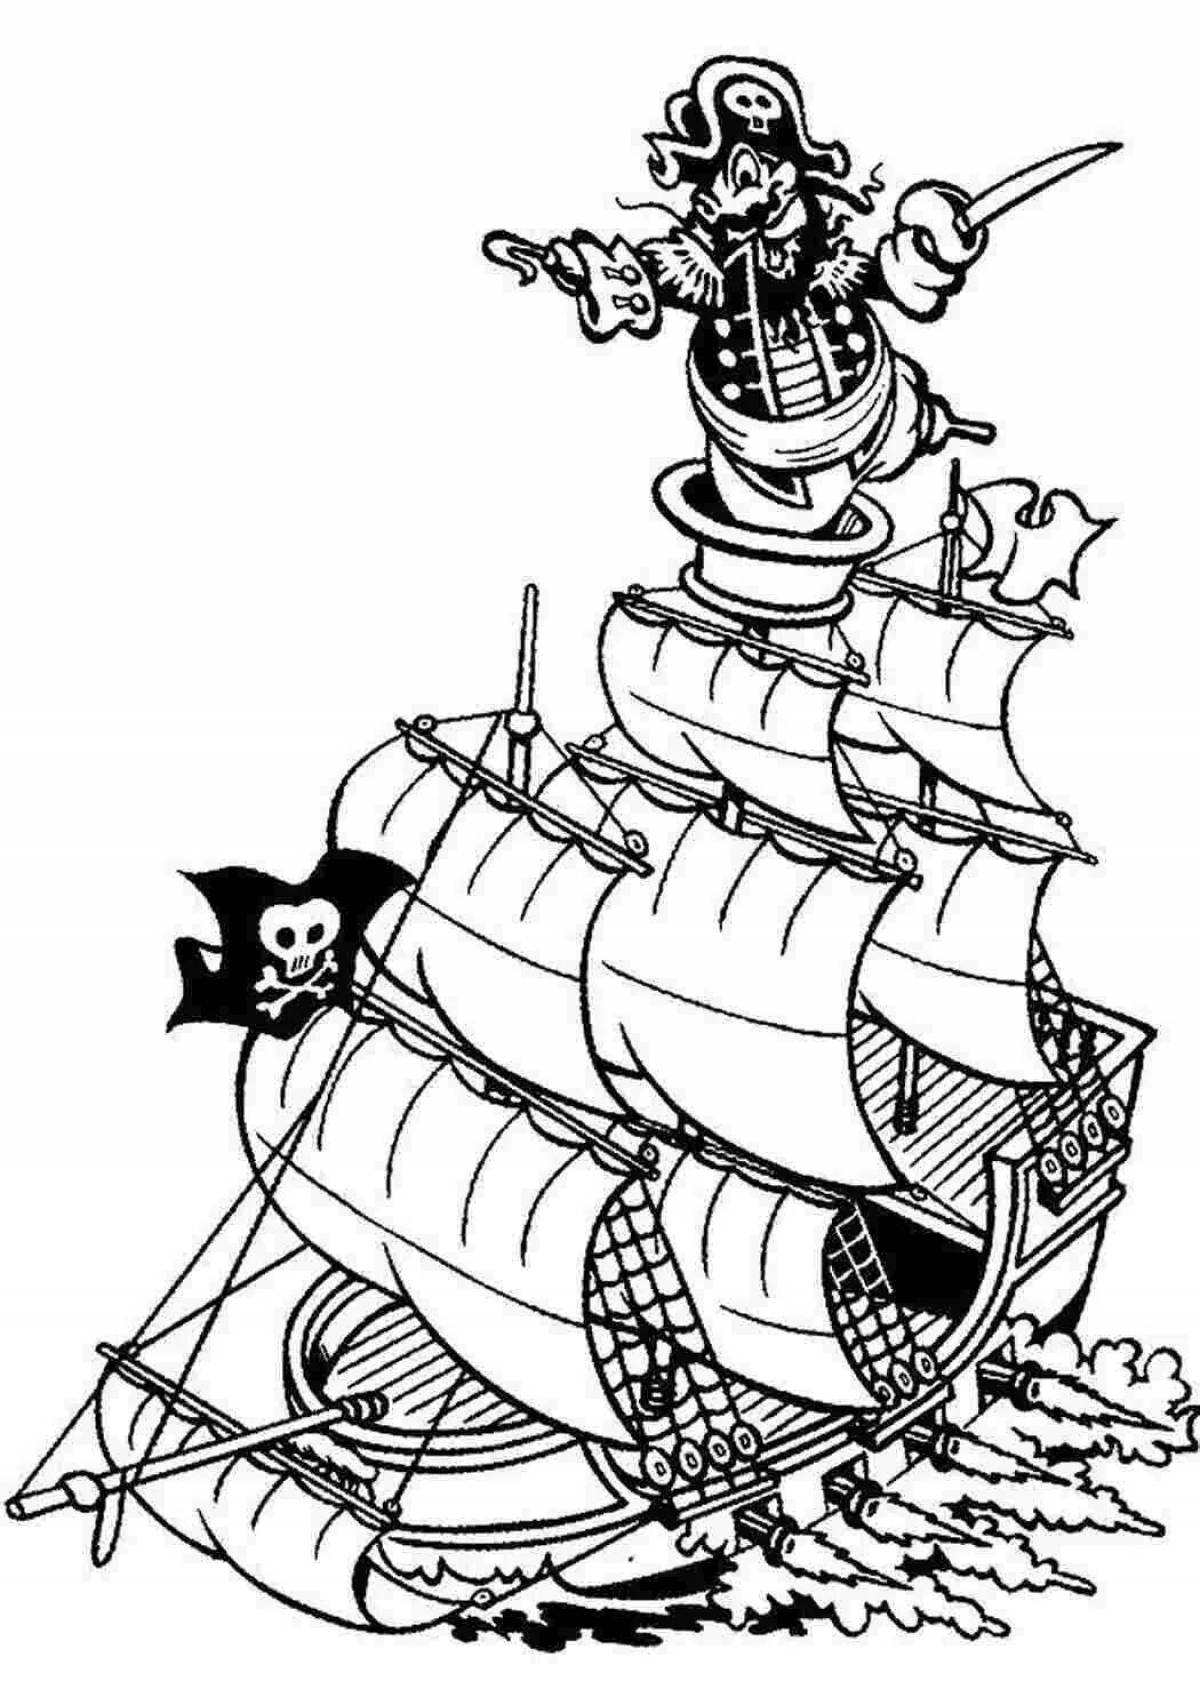 Great pirate ship coloring book for kids